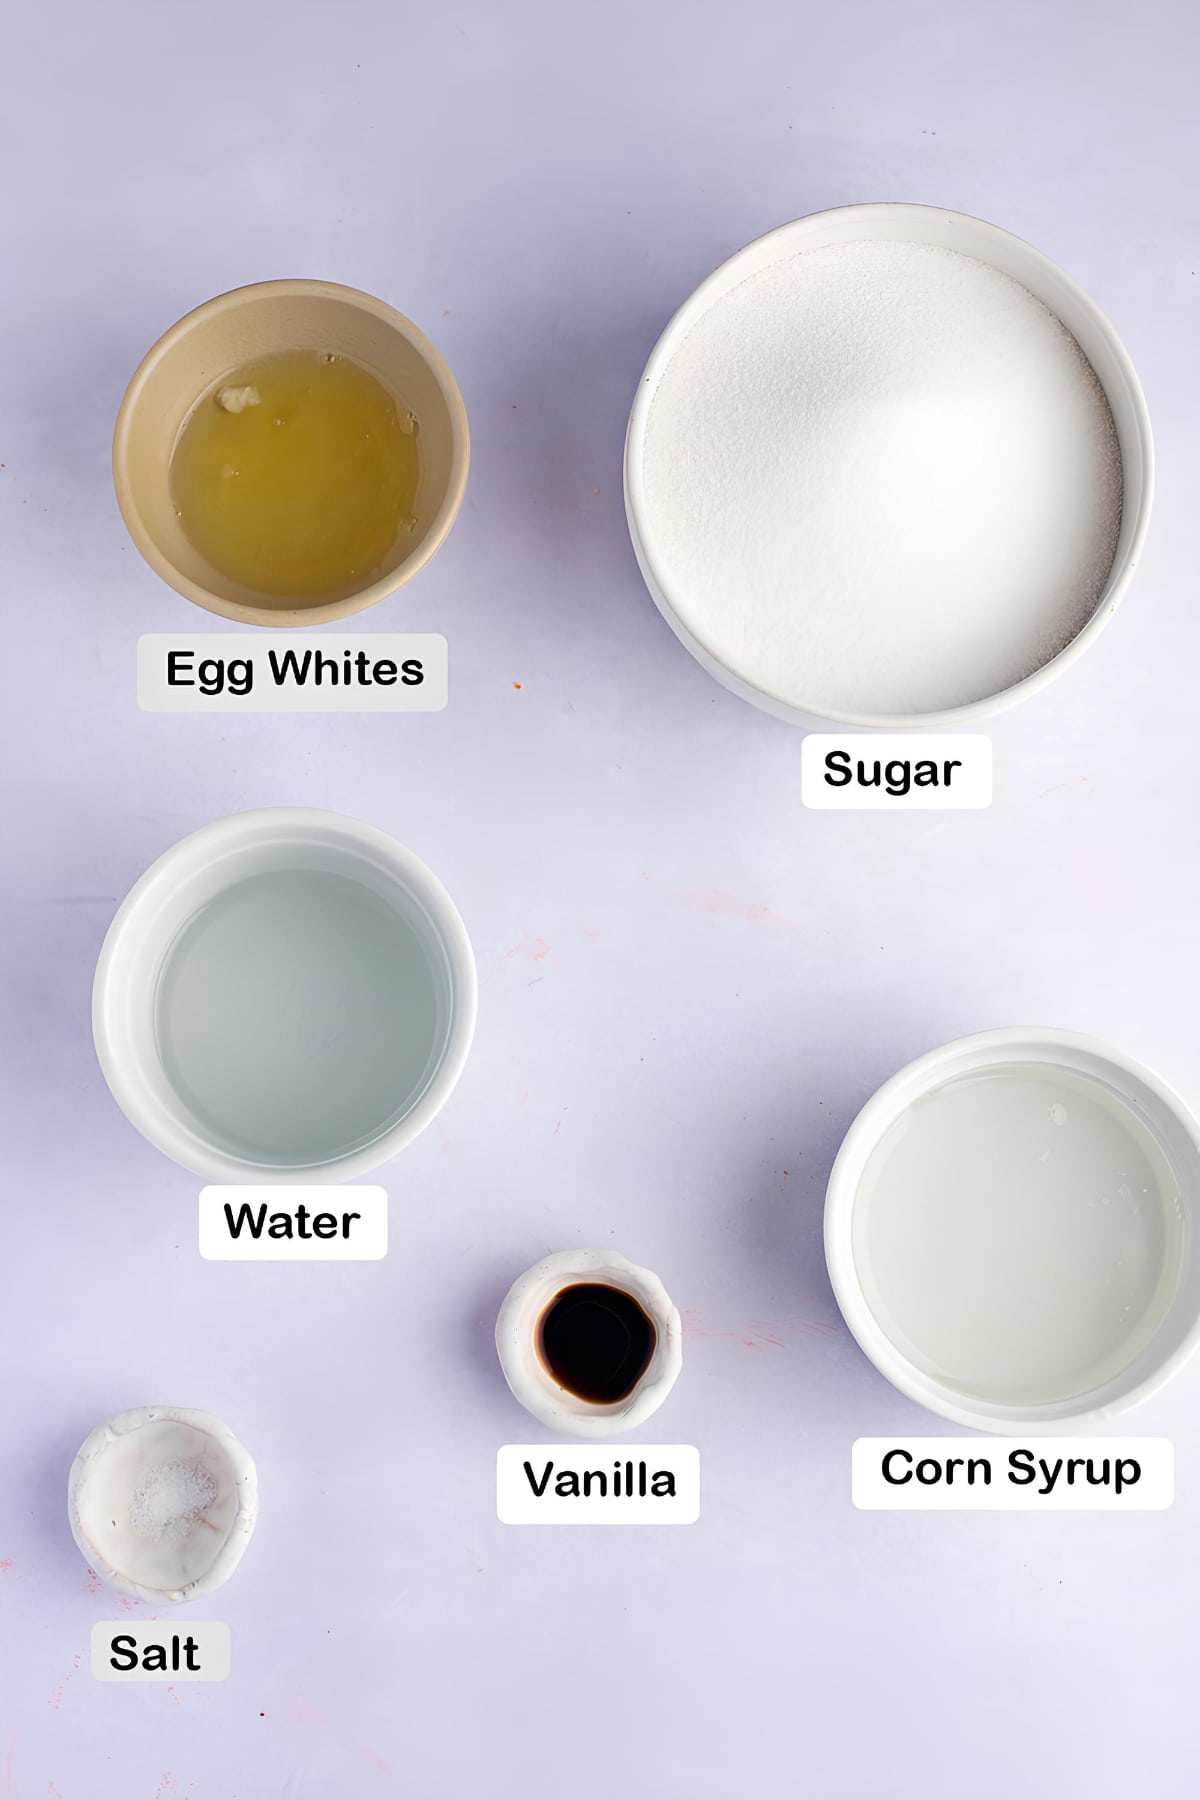 Divinity Candy Ingredients - Egg Whites, Sugar, Water, Vanilla, Salt and Corn Syrup